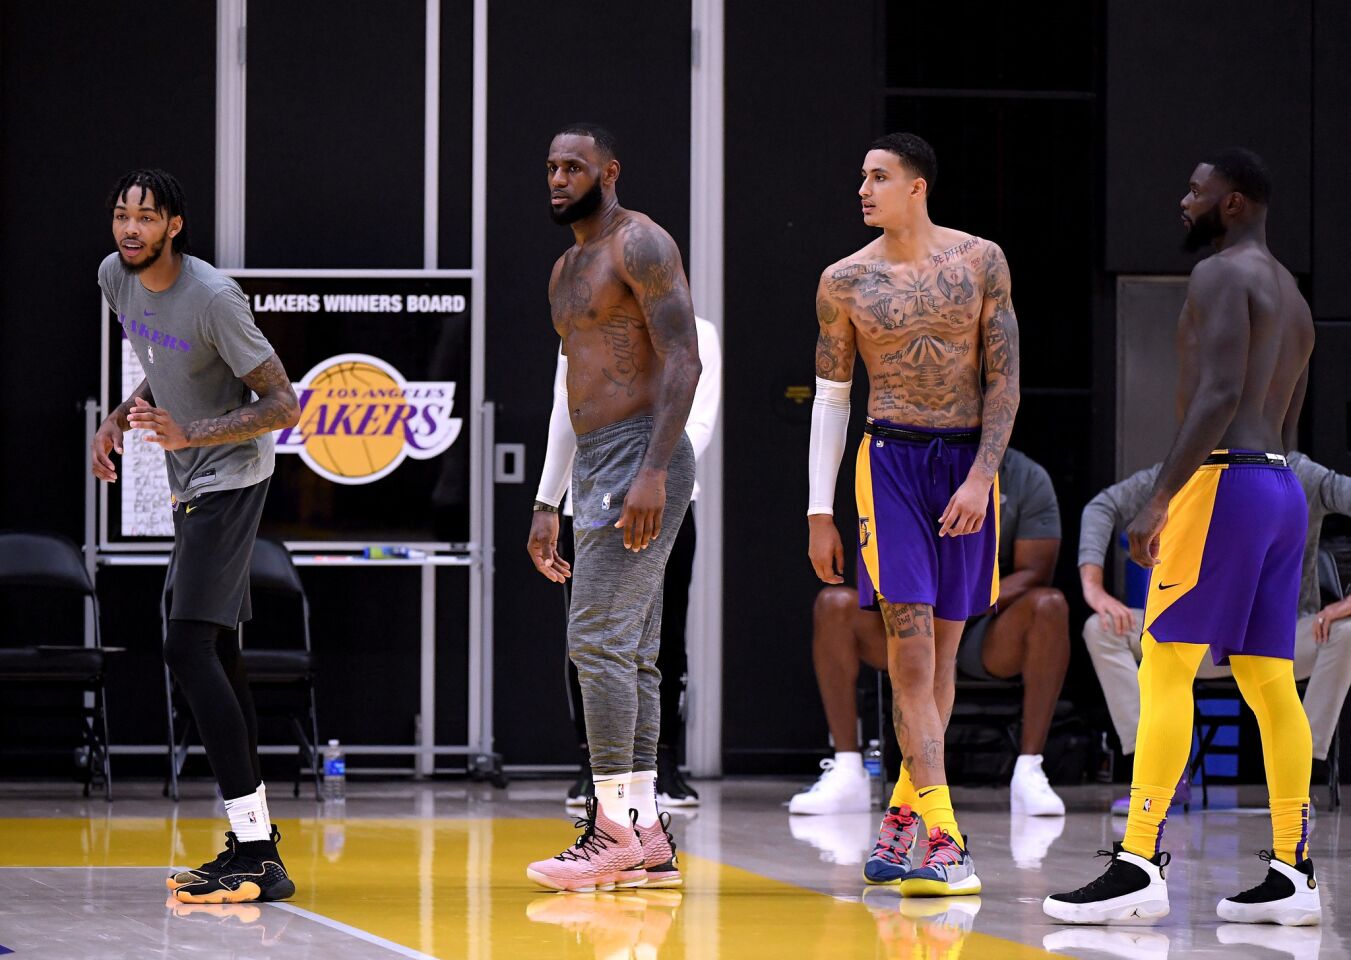 EL SEGUNDO, CA - SEPTEMBER 25: (L-R) Brandon Ingram, LeBron James, Kyle Kuzma and Lance Stephenson of the Los Angeles Lakers line up for a pass during a Los Angeles Lakers practice session at the UCLA Health Training Center on September 25, 2018 in El Segundo, California. (Photo by Harry How/Getty Images) ** OUTS - ELSENT, FPG, CM - OUTS * NM, PH, VA if sourced by CT, LA or MoD **